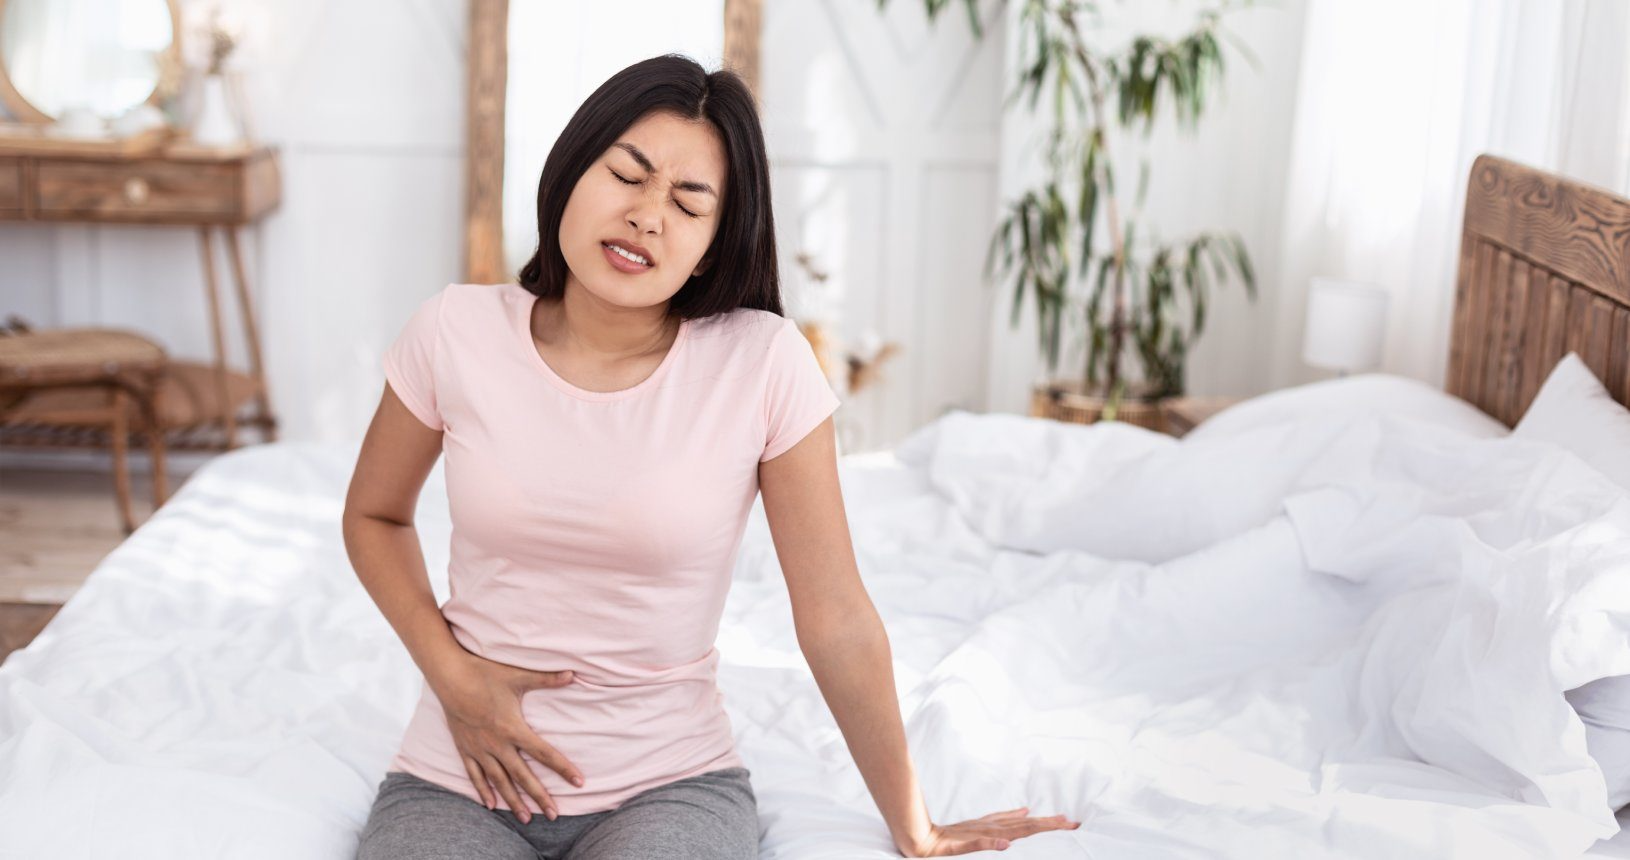 Pelvic Floor Dysfunction: Causes, Symptoms, And Treatment